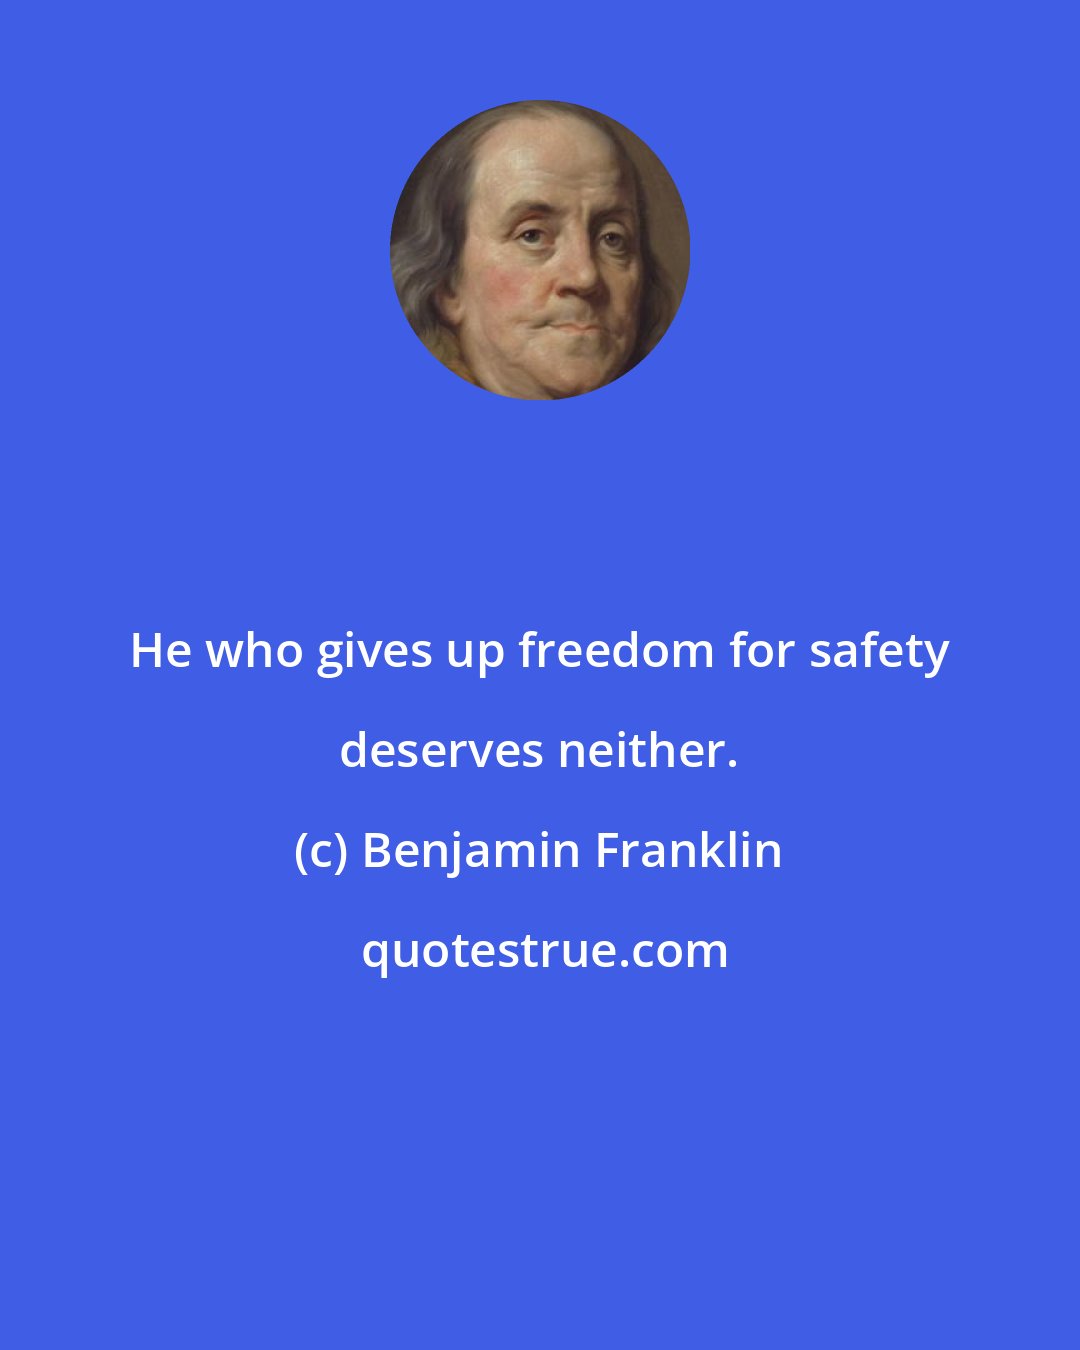 Benjamin Franklin: He who gives up freedom for safety deserves neither.